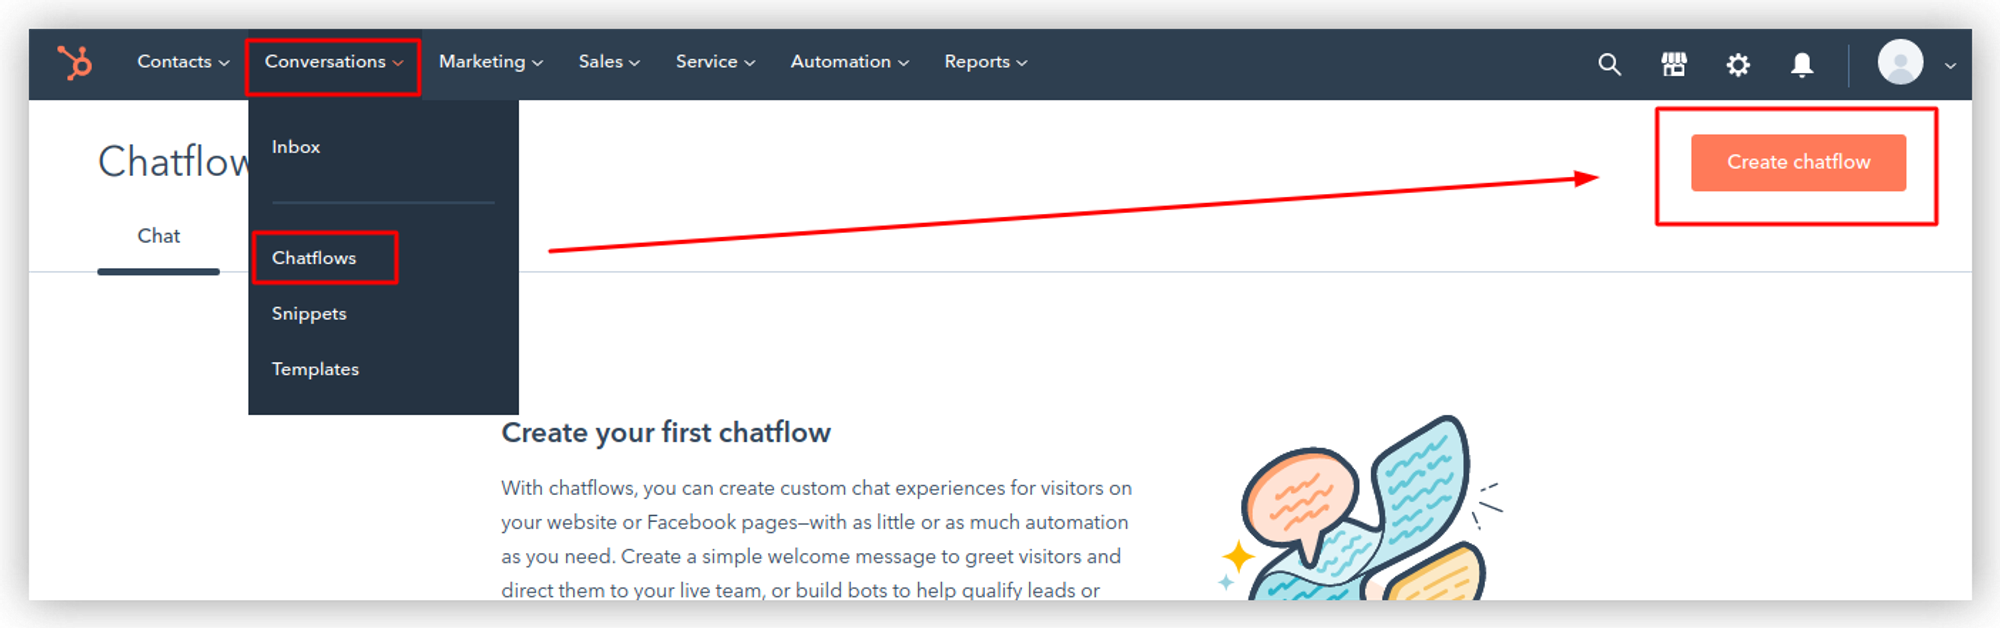 Creating a Chatflow